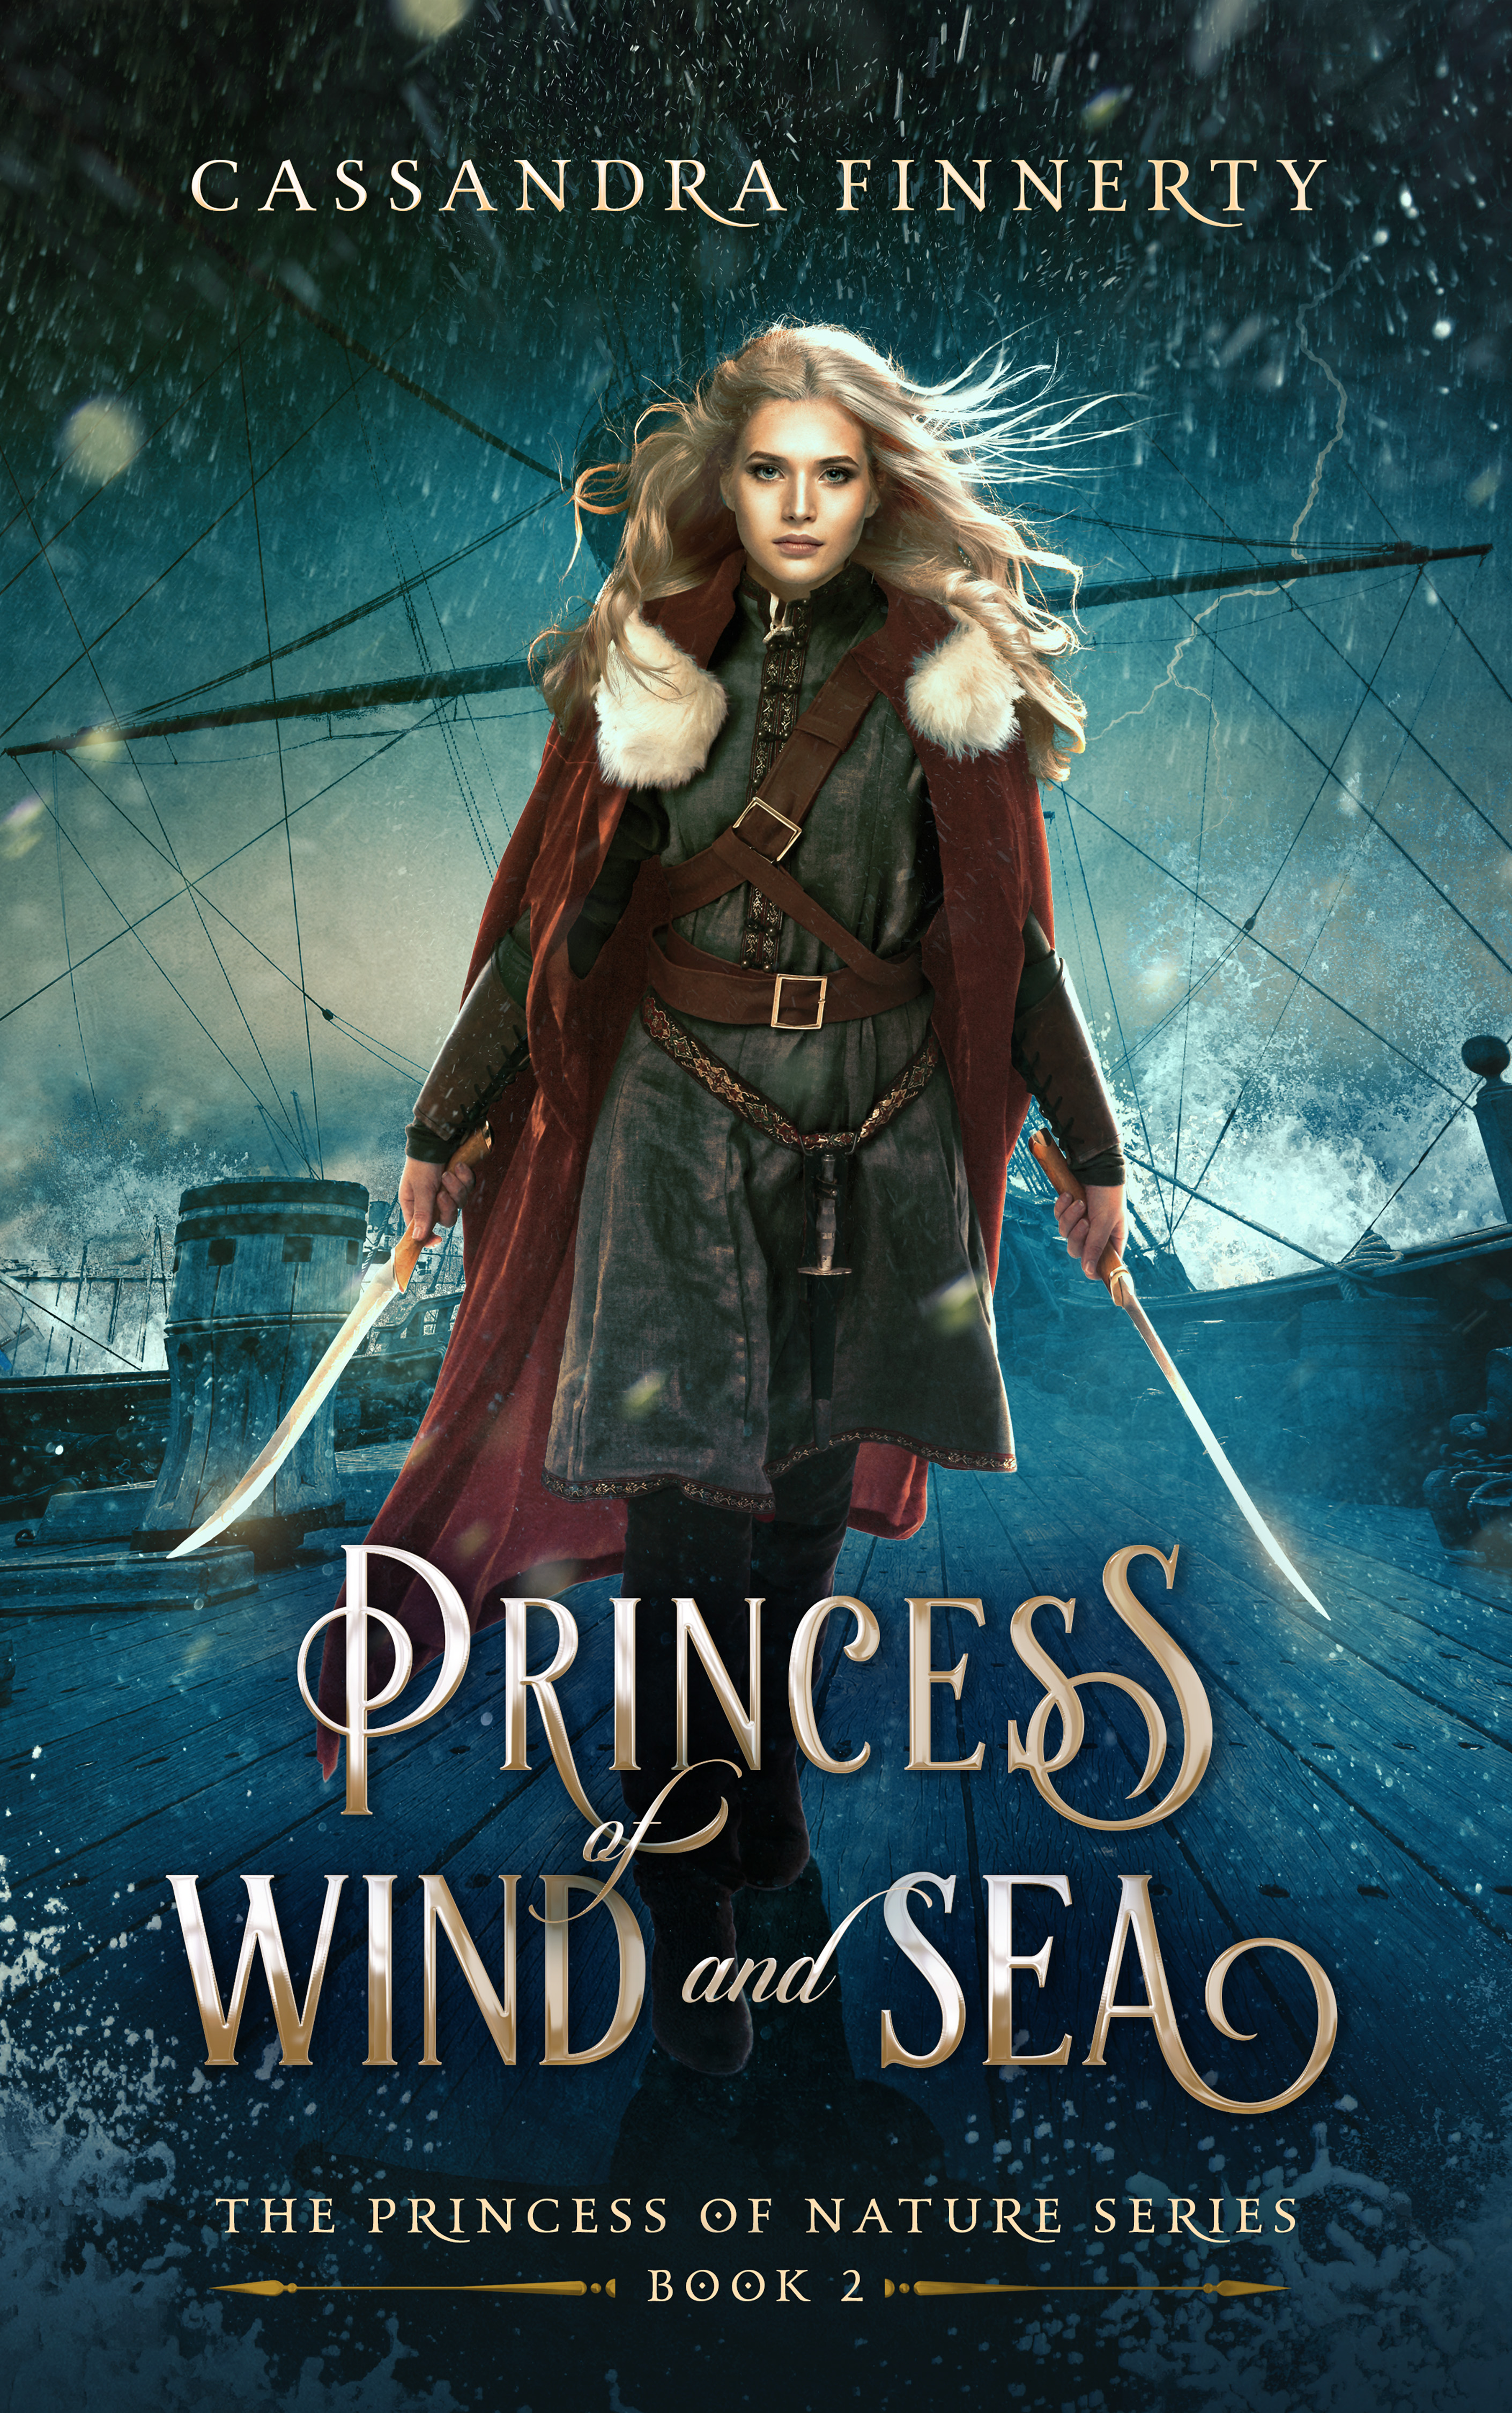 Princess of Wind and Sea by Cassandra Finnerty